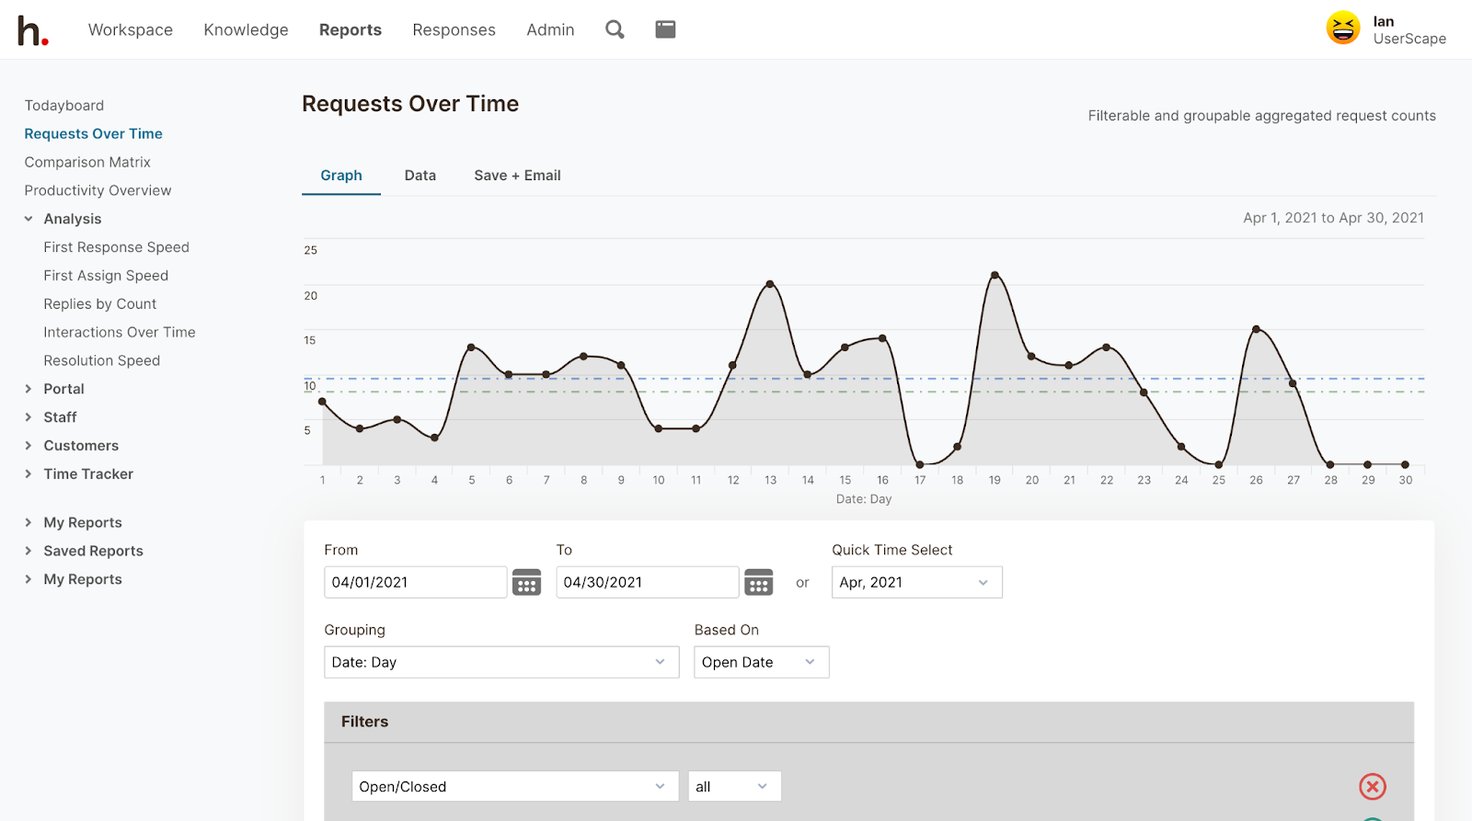 HelpSpot's performance reports can help you see your average response time and requests over time.